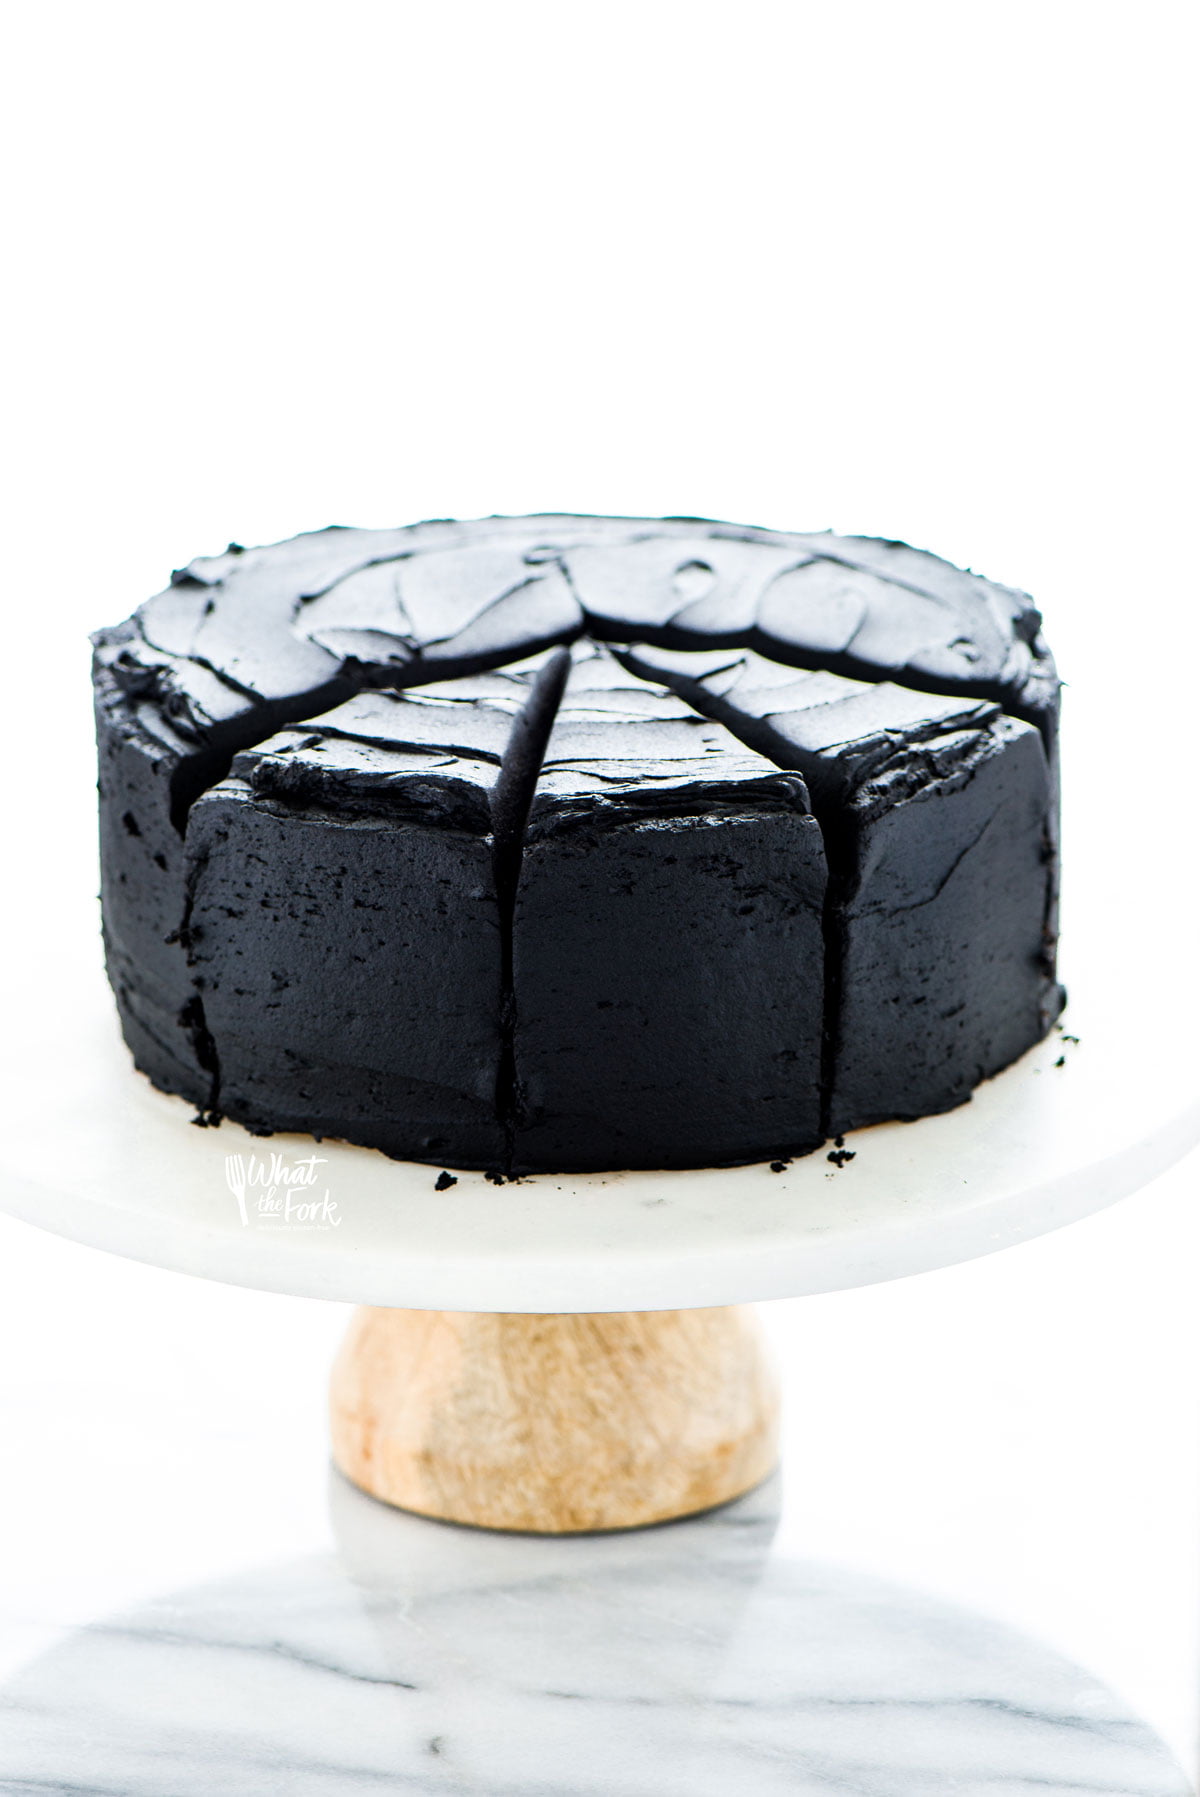 a baked and frosted gluten free black velvet cake recipe on top of a white marble cake stand with a wood base. It's been frosted with black buttercream and has 3 slices cut but not served.